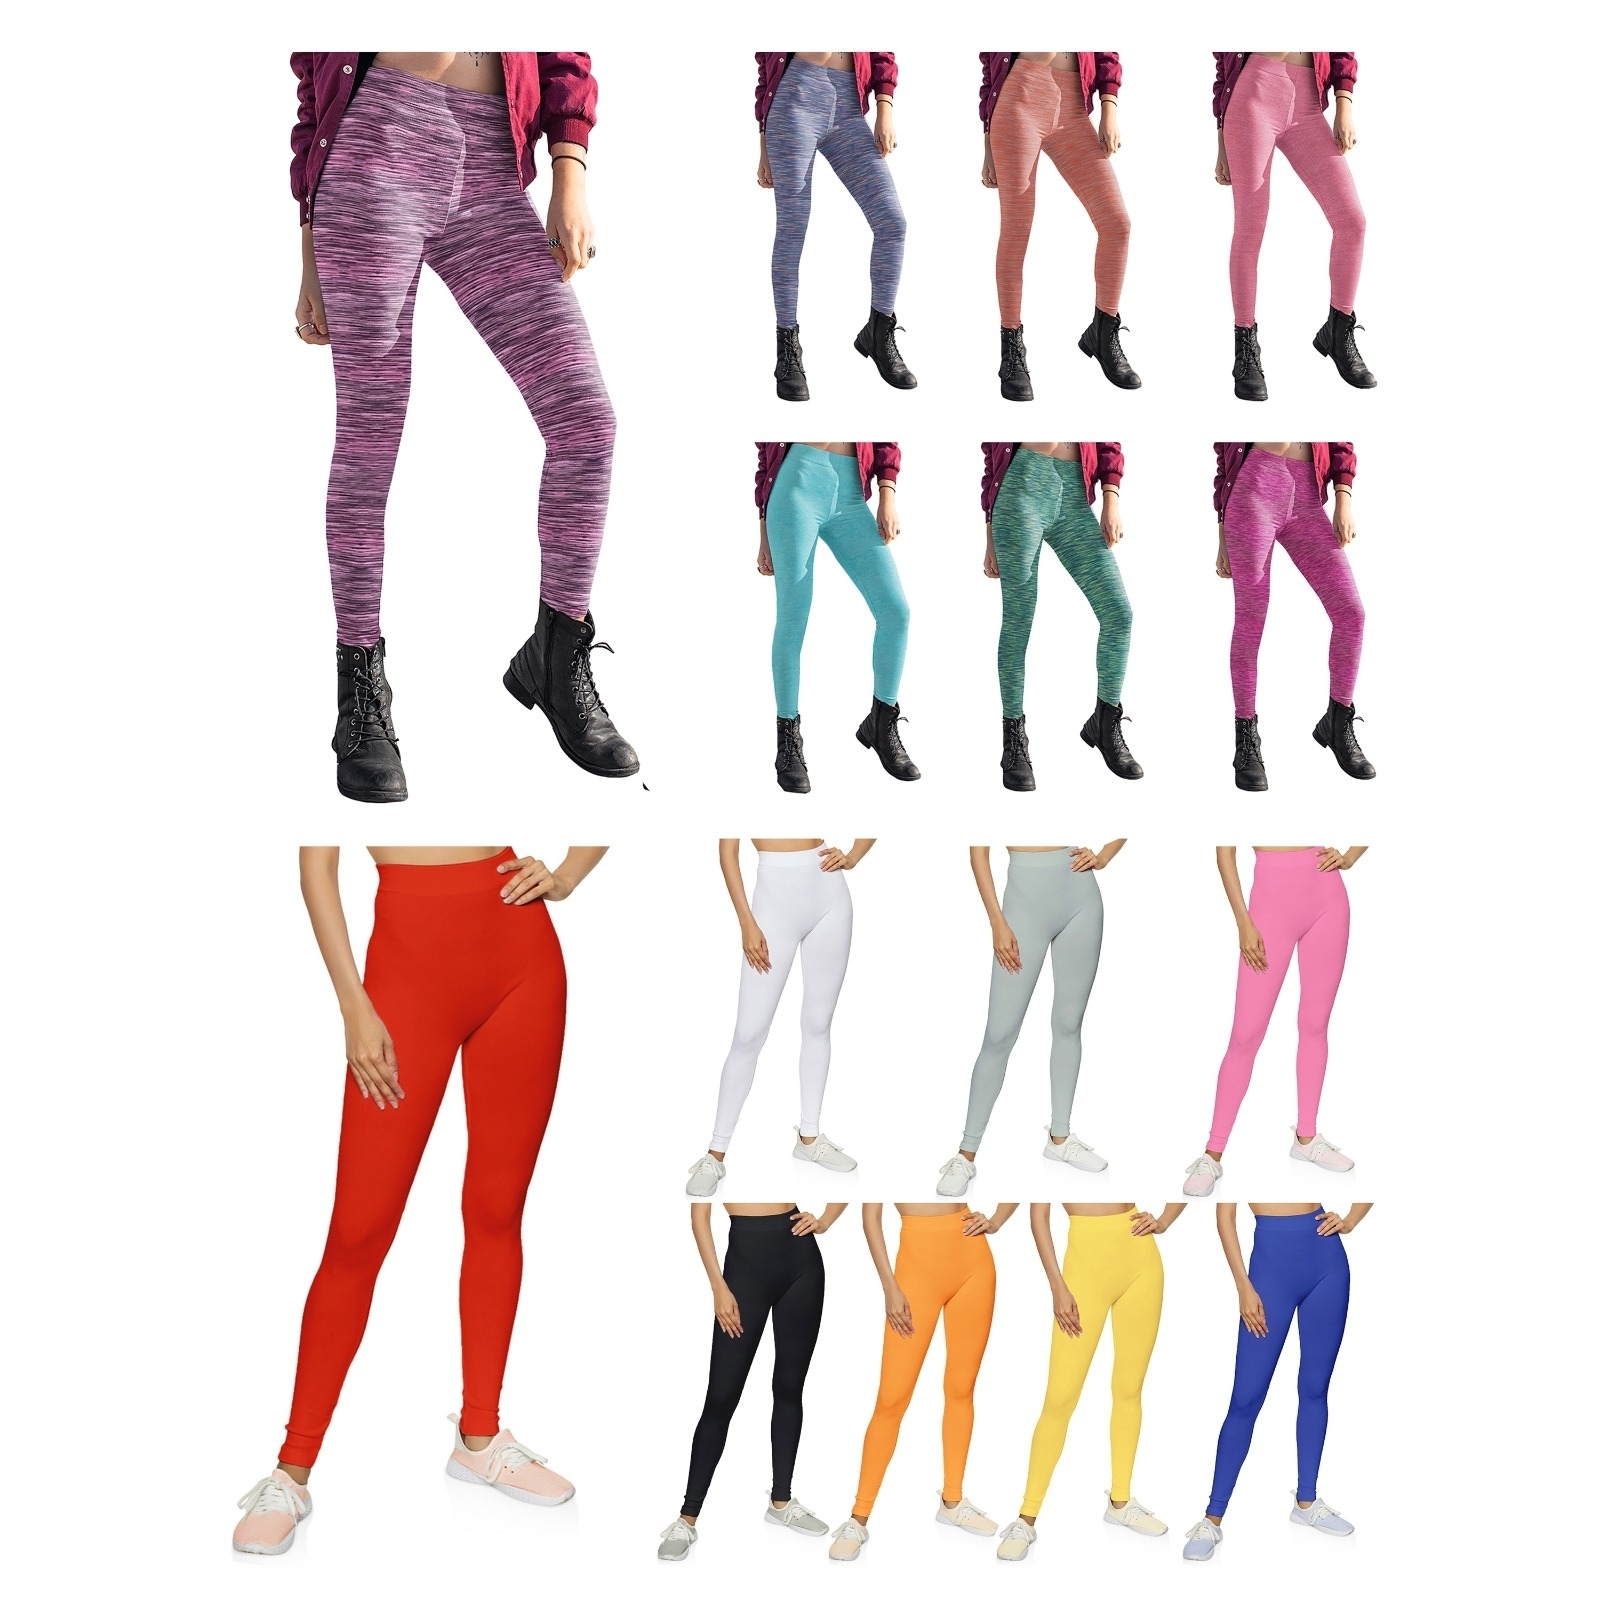 2-Pack: Women's Ultra-Soft Yoga Workout Leggings - Assorted, Large/X-Large